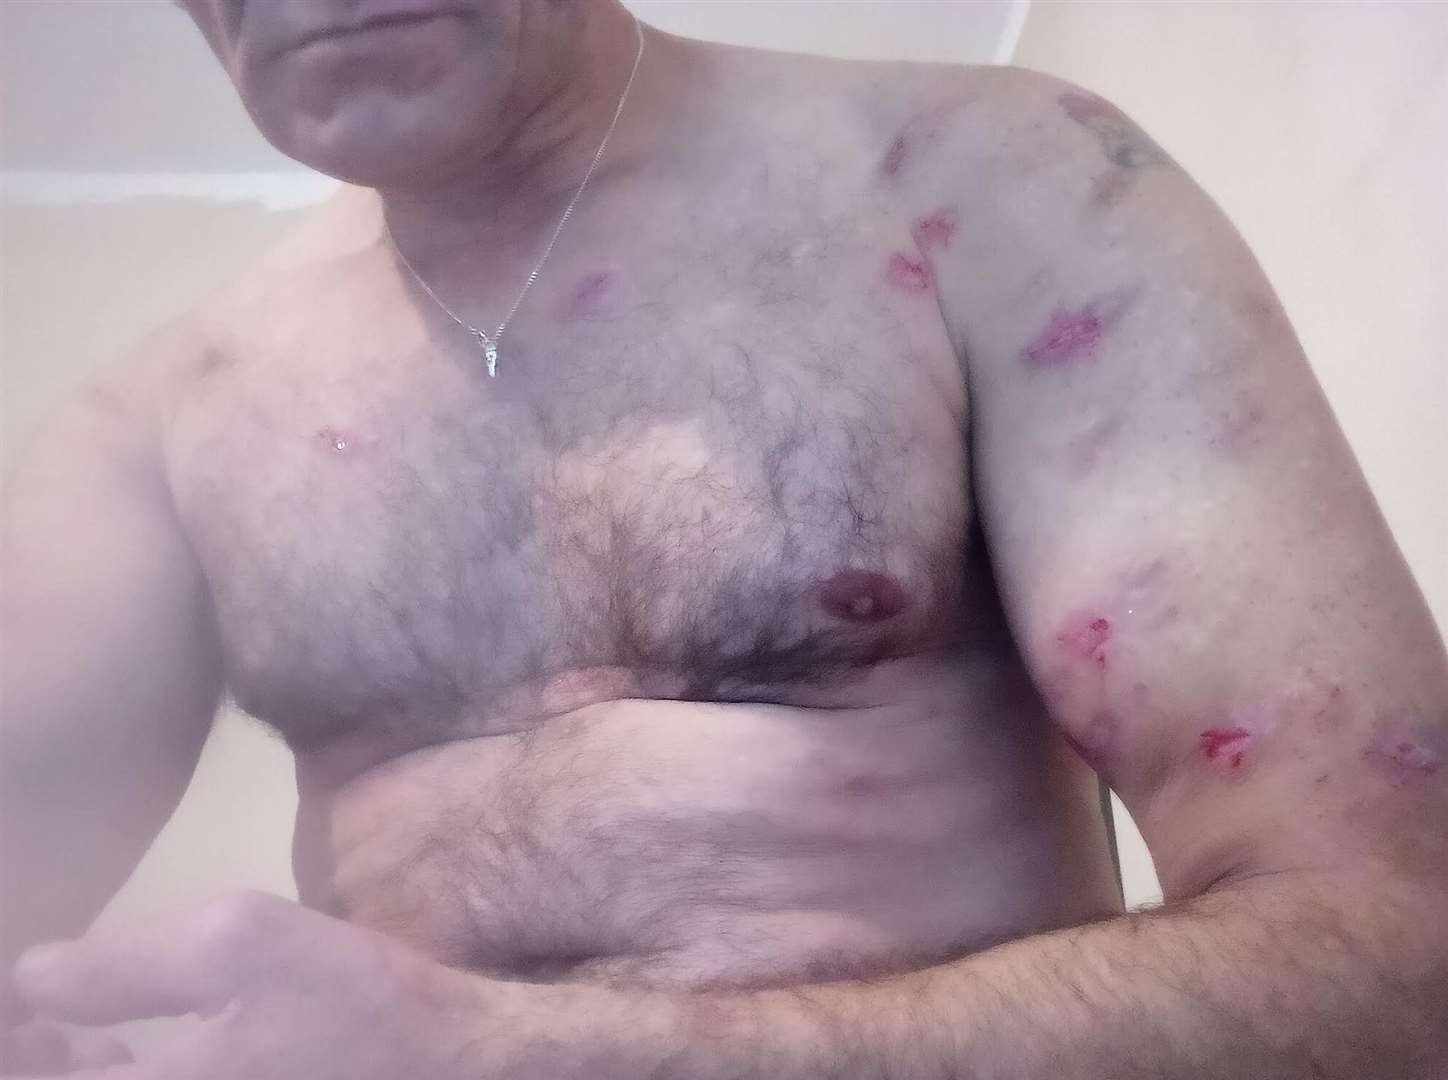 Russell has been bitten more than 100 times across his body, with new bites appearing daily. Picture: Russell Davis